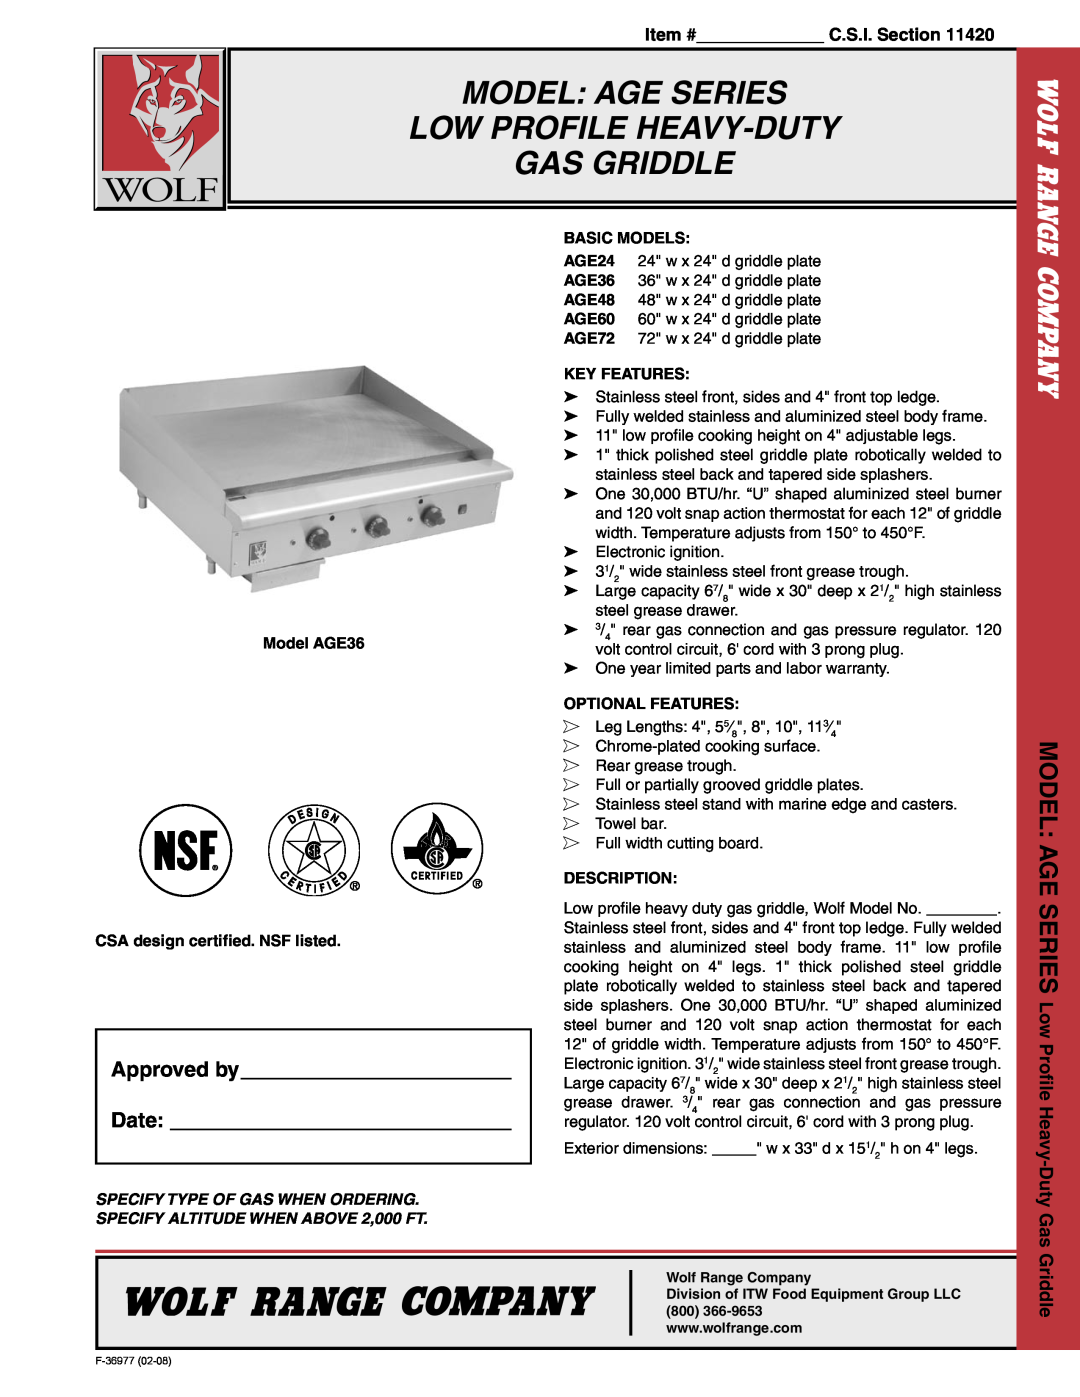 Wolf AGE24 warranty Model Age Series Low Profile Heavy-Duty Gas Griddle, Basic Models, Key Features, Optional Features 